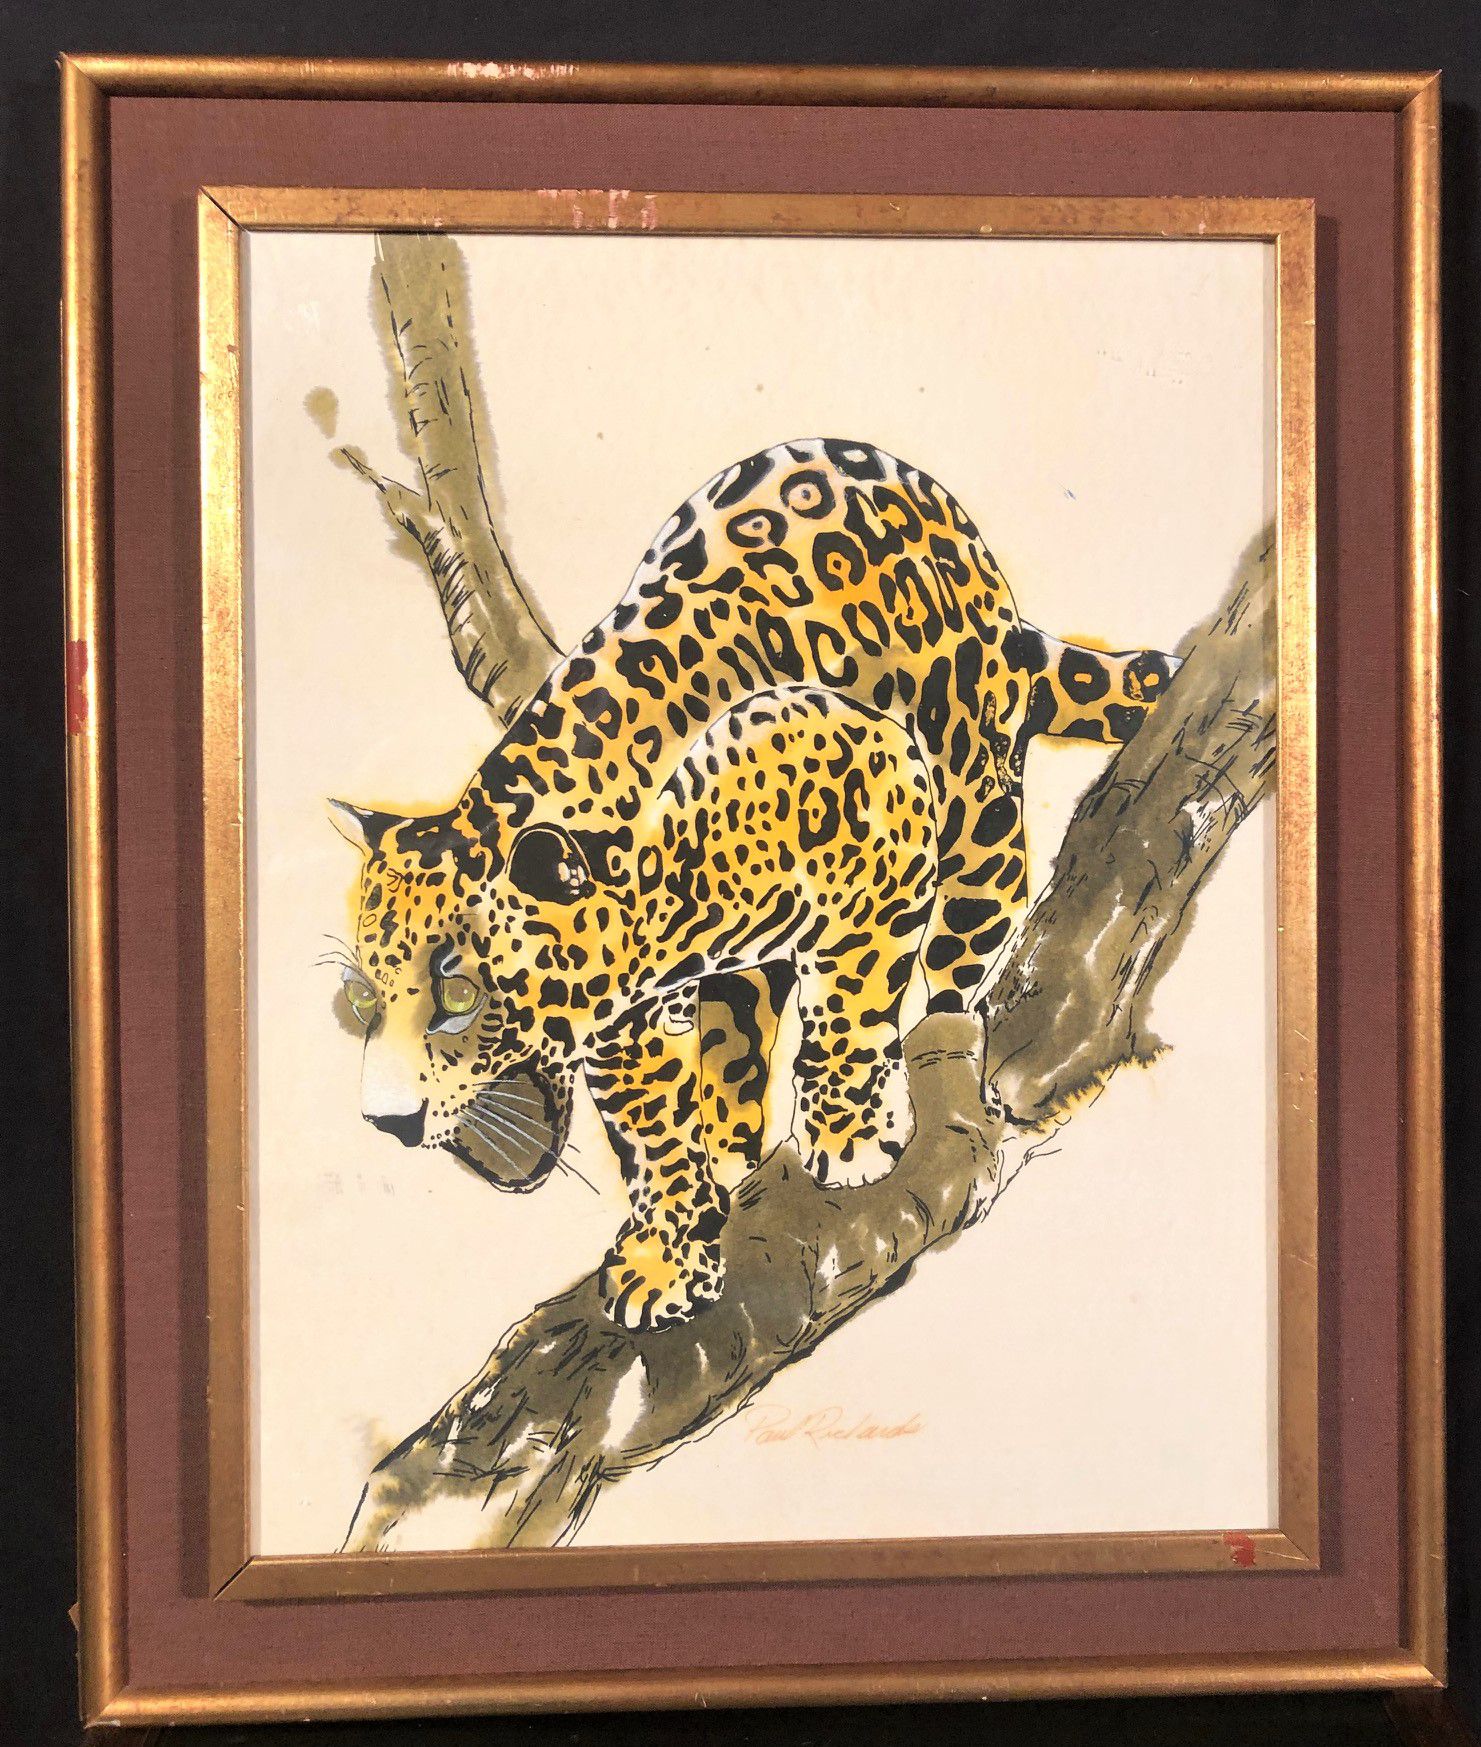 PAUL RICHARDS (BORN 1949) – ORIGINAL WATERCOLOR ON PAPER OF LEOPARD, SIGNED AND FRAMED – 32” x 26” x 2”